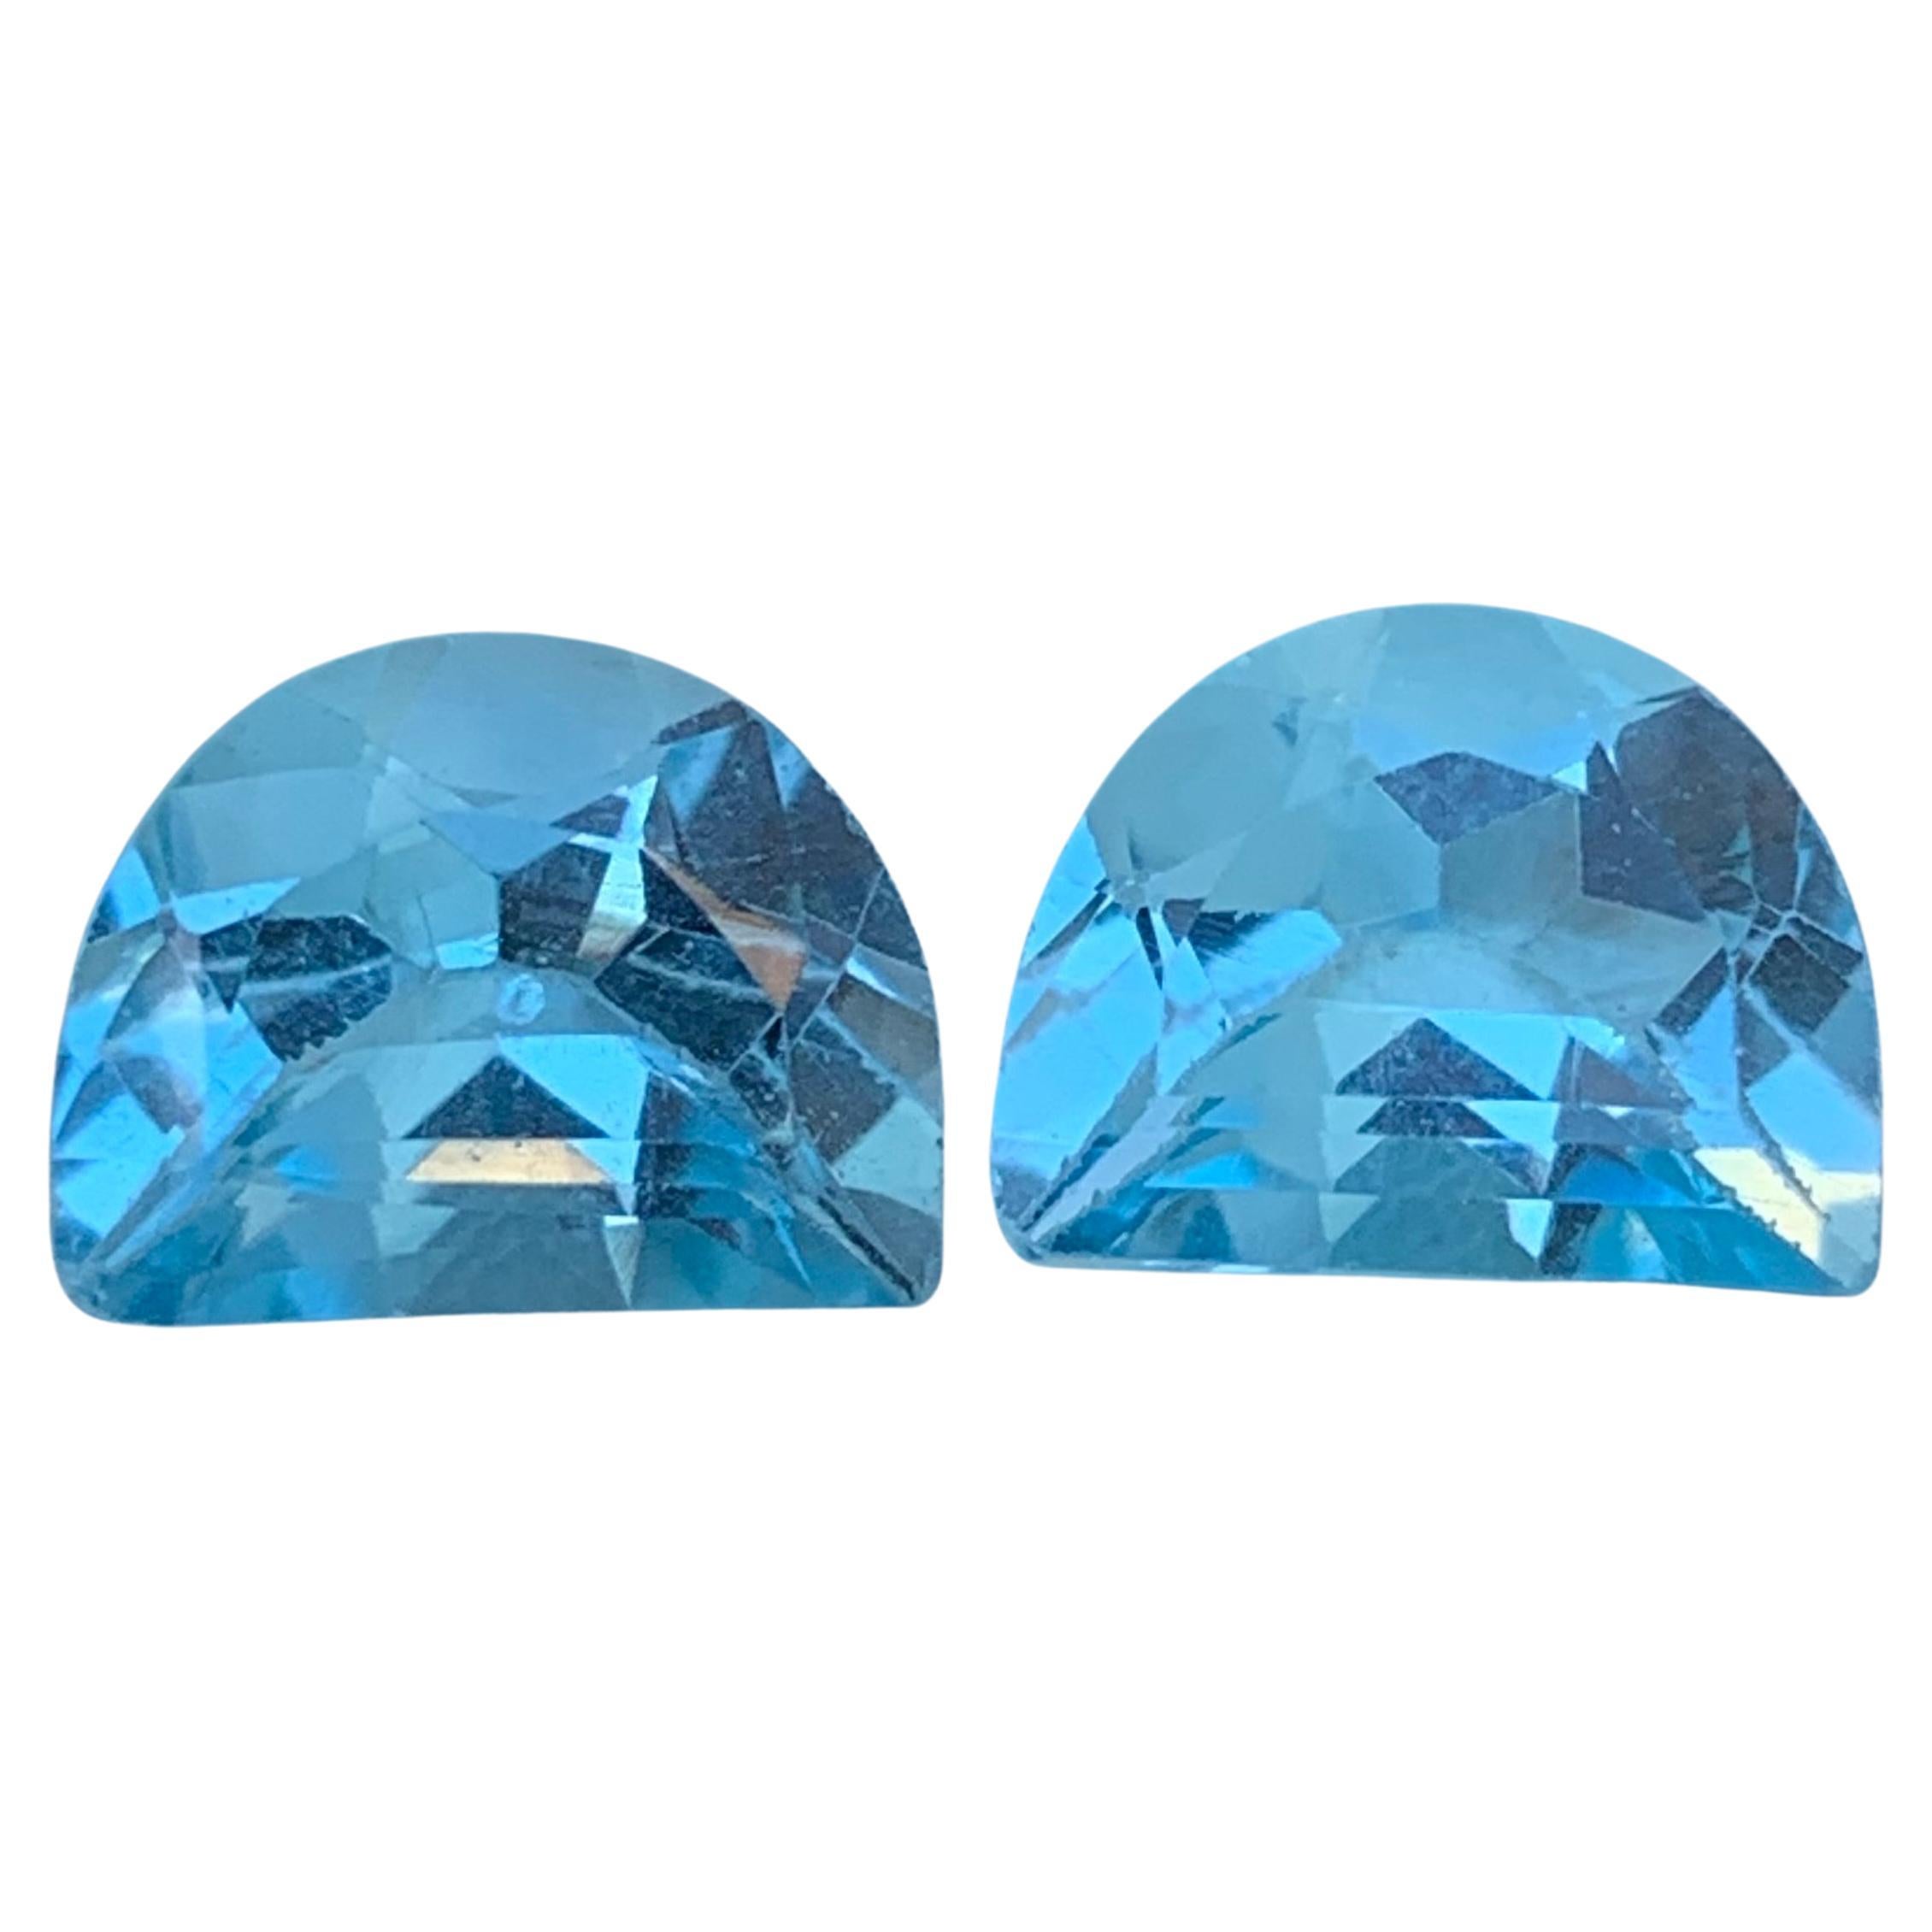 4.80 Carat Adorable Loose Blue Topaz Pair Carving For Earrings 